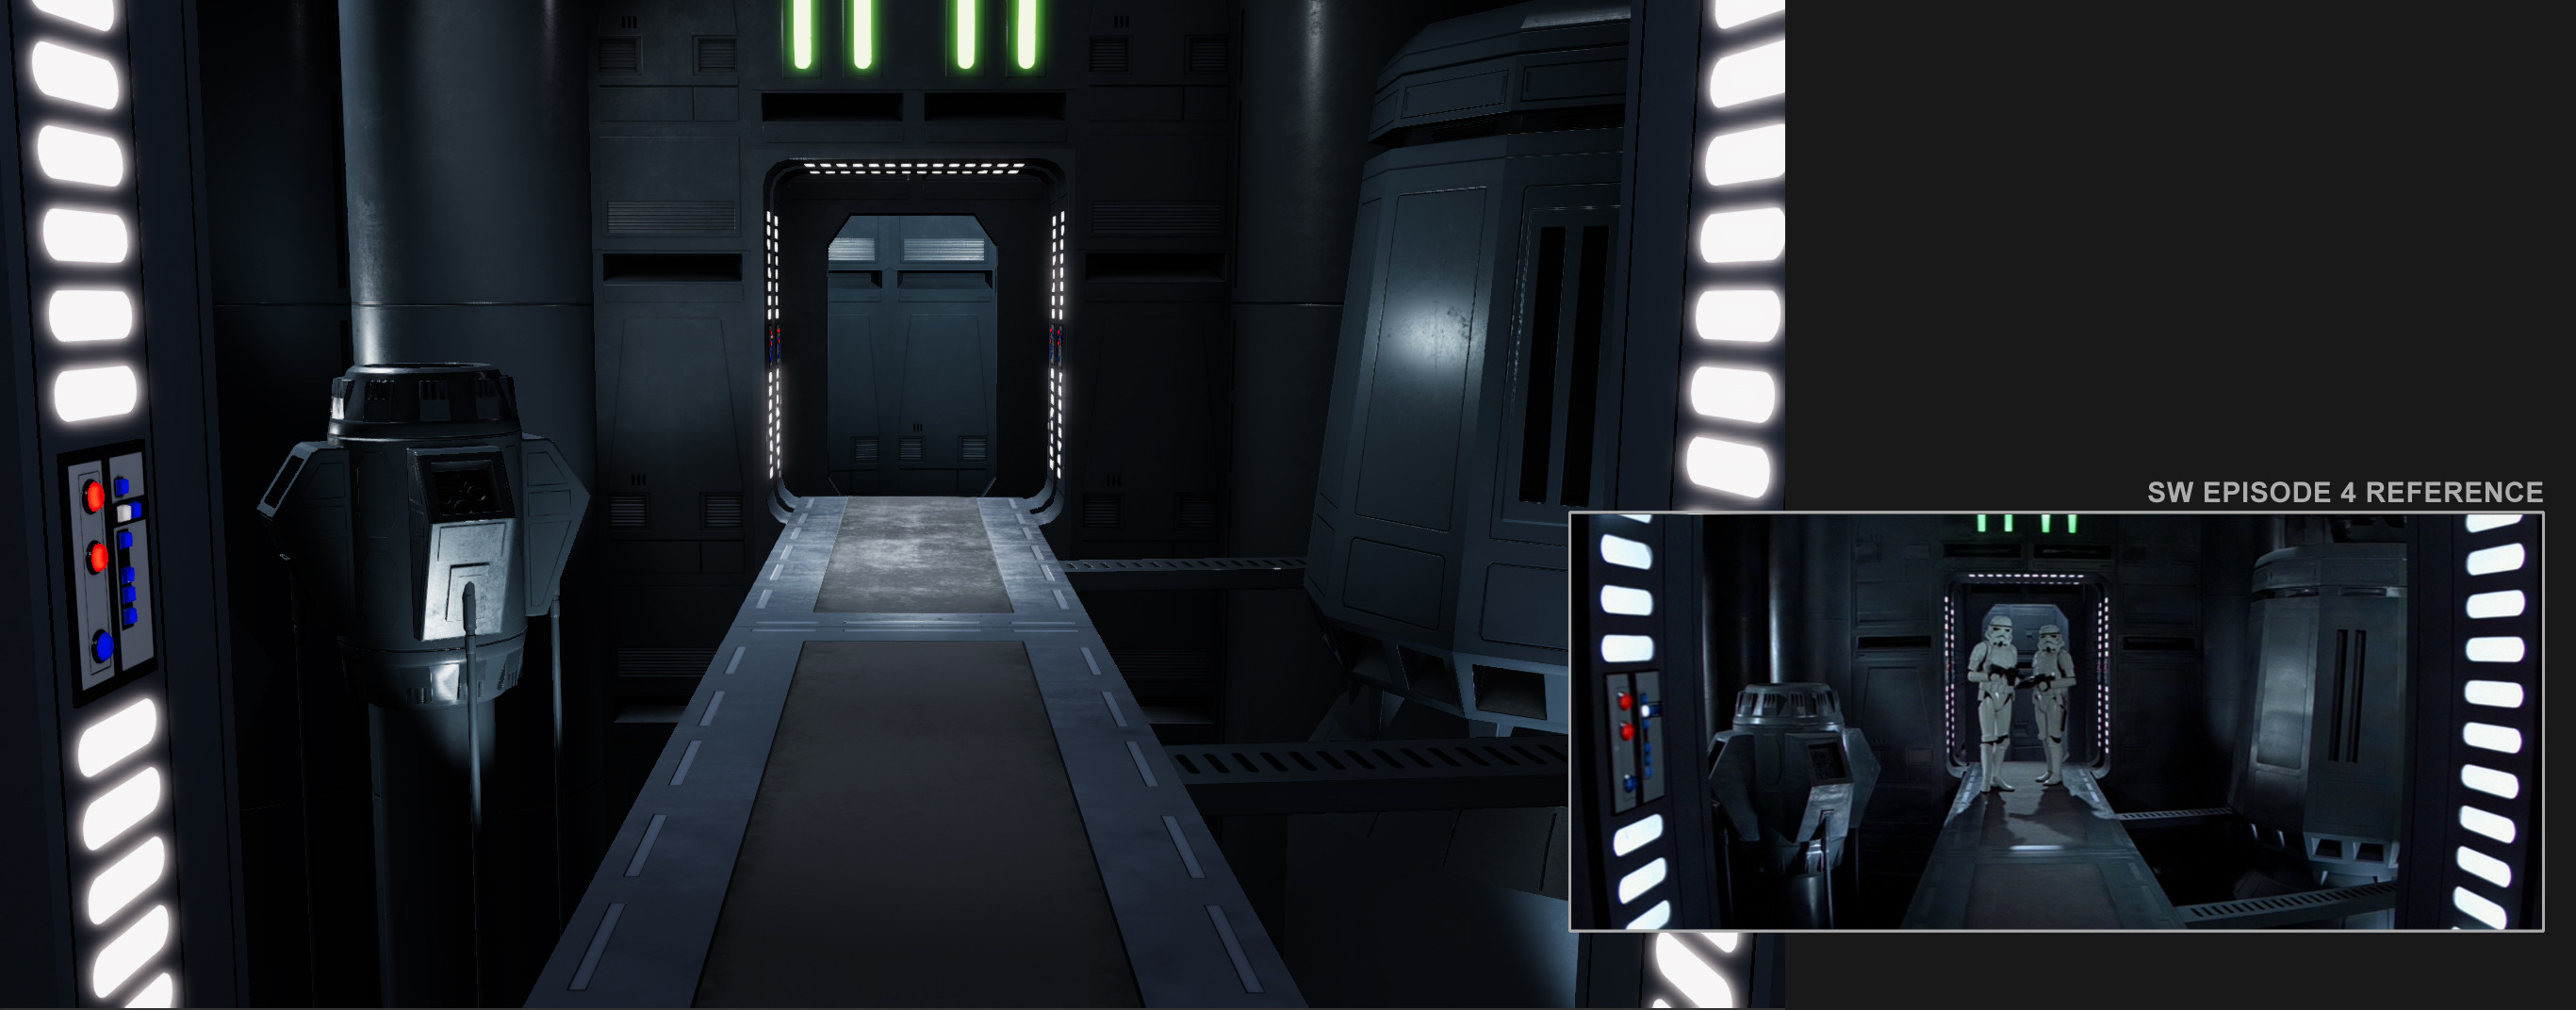 Unity screenshot. Still from the movie on the right for comparison.